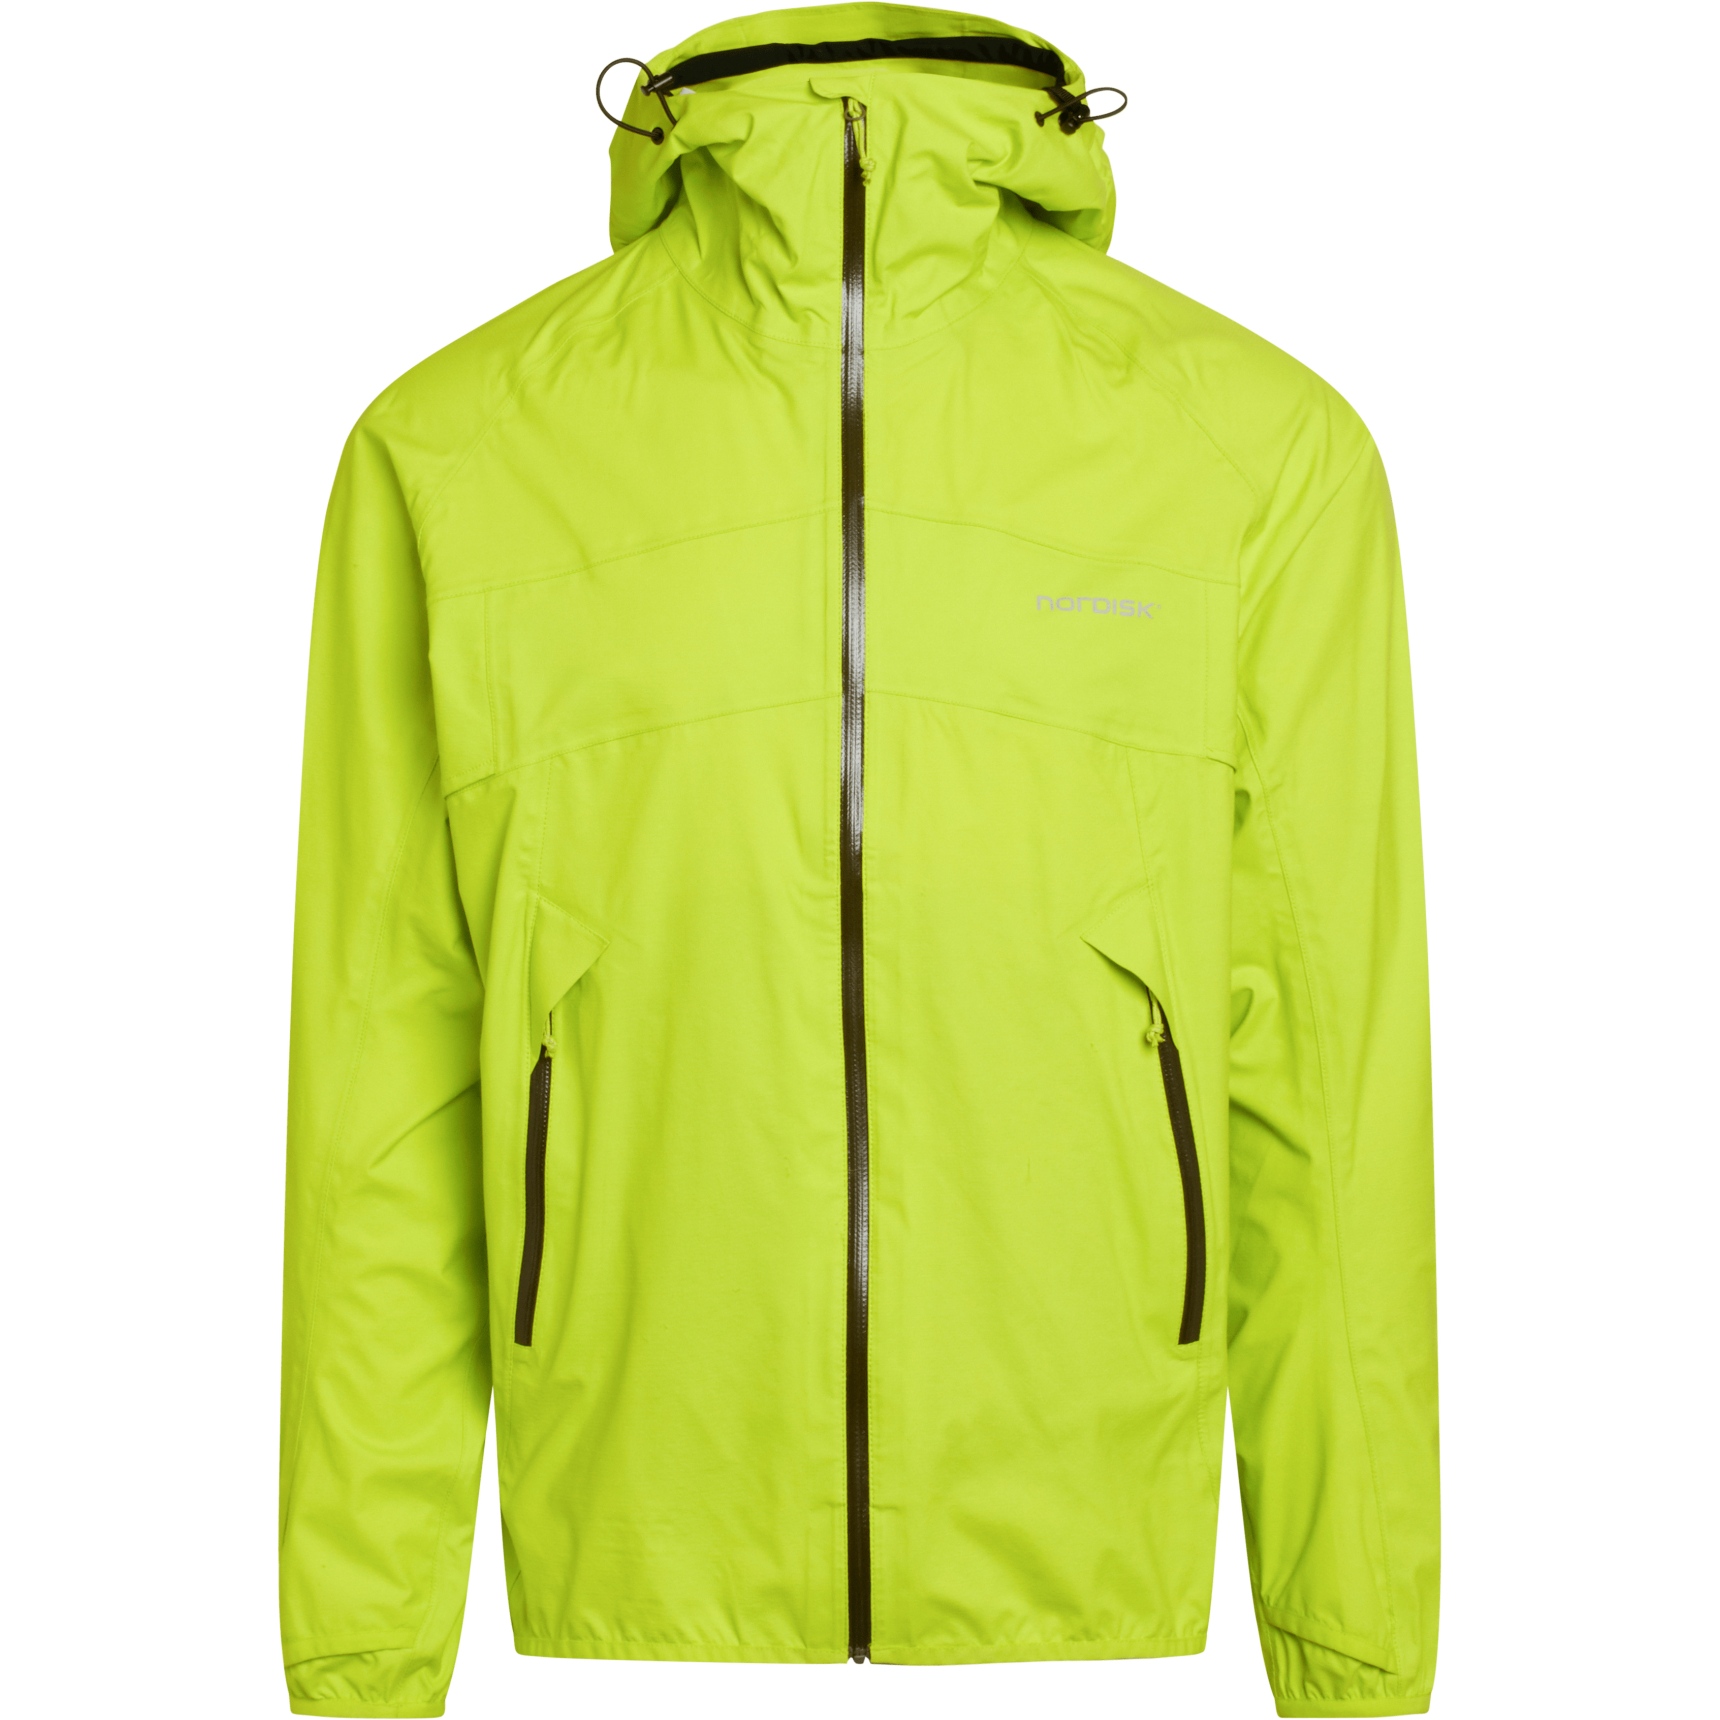 Image of Y by Nordisk Medby Ultralight 3-Layer Jacket - lime punch